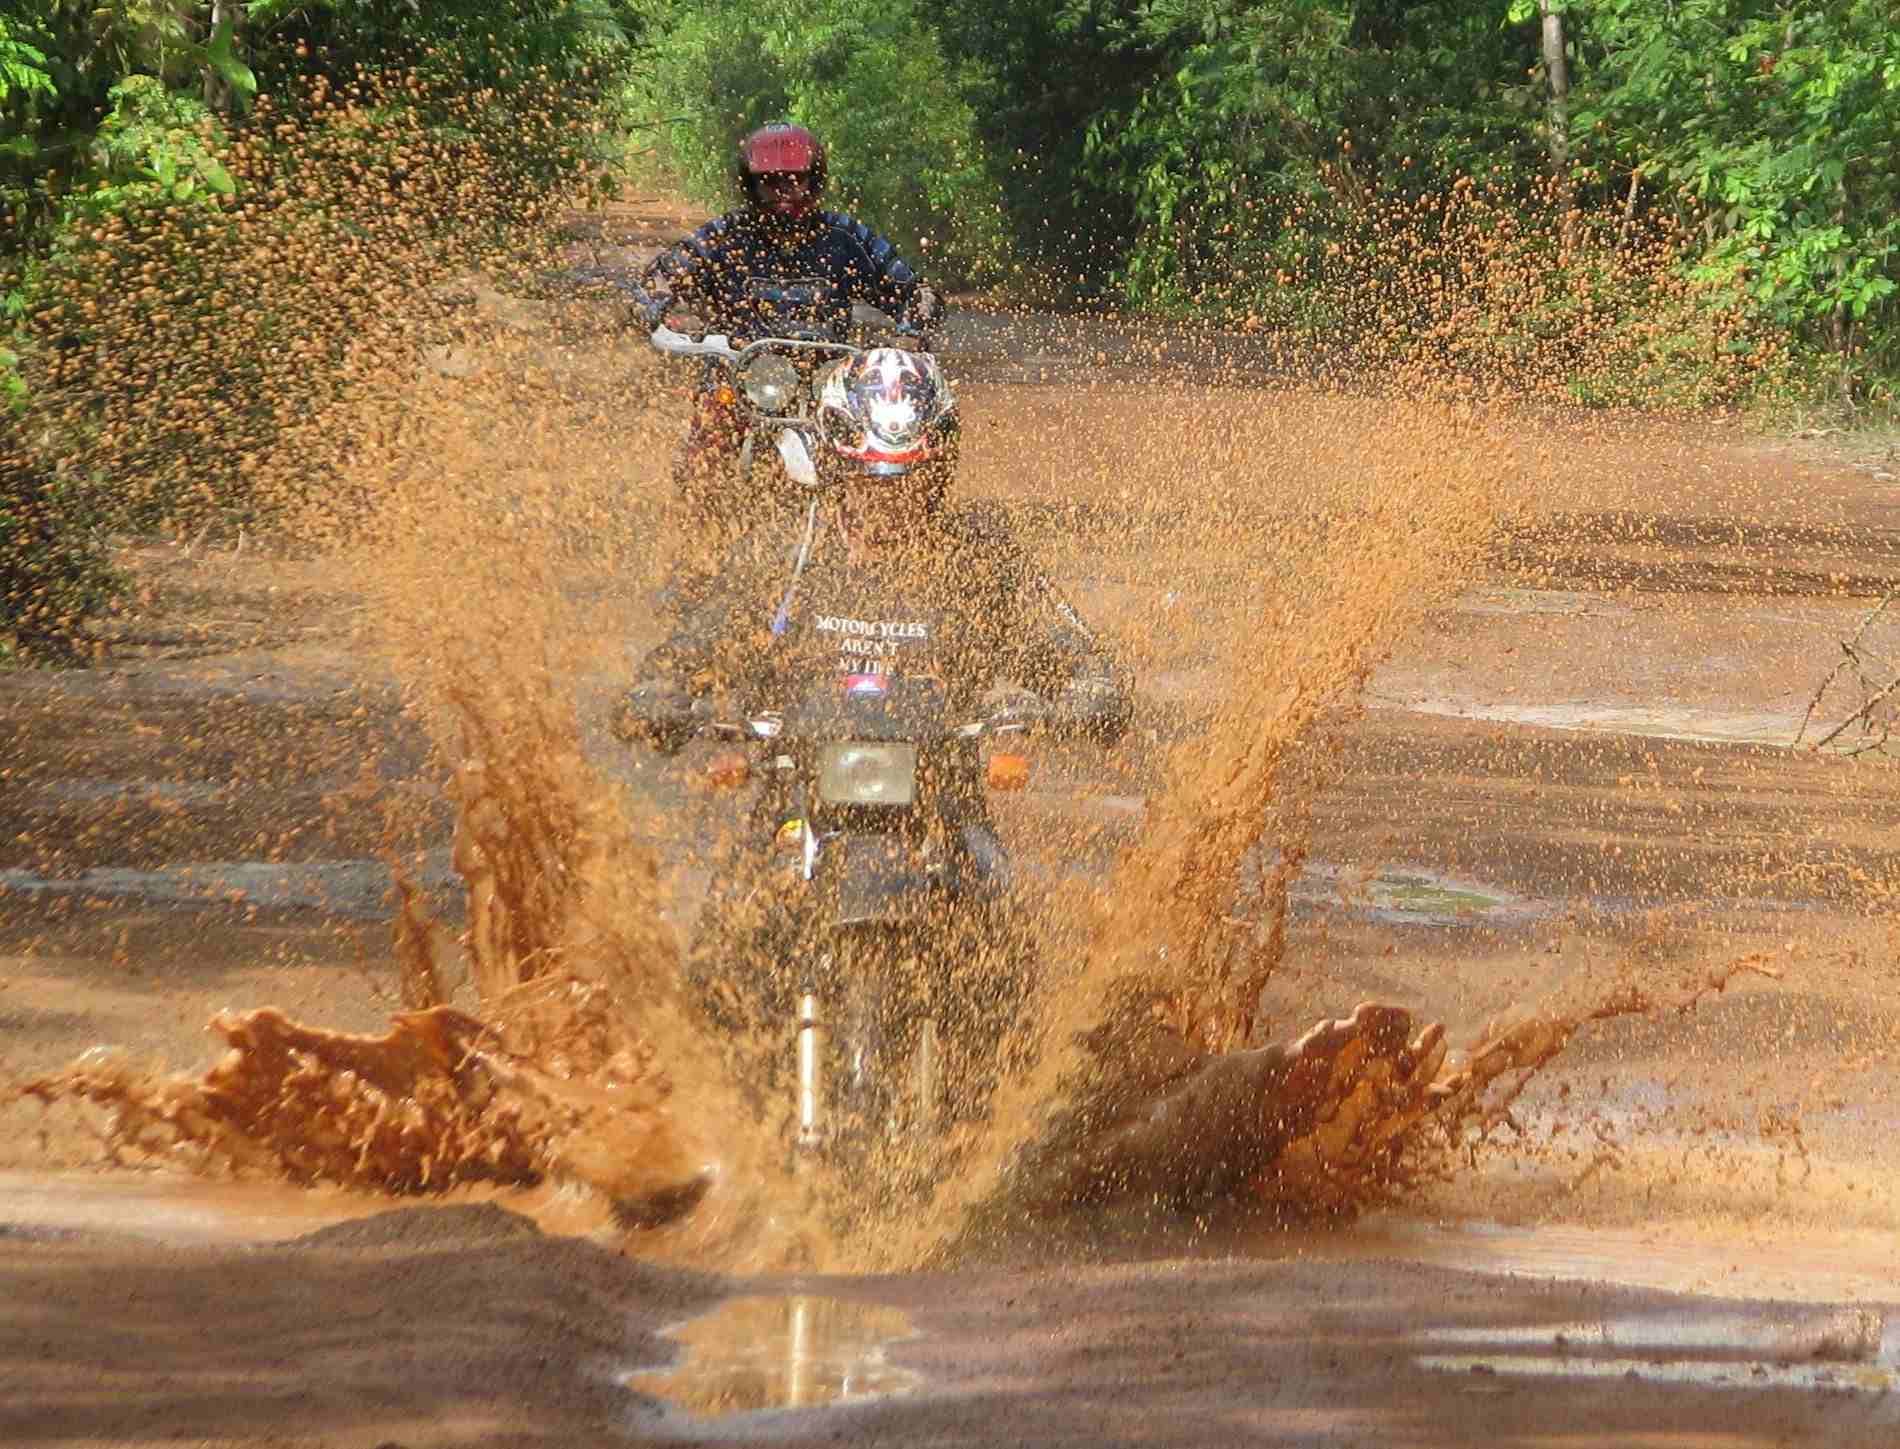 Laos Northern Offroad Motorcycle Tour - 12 Days